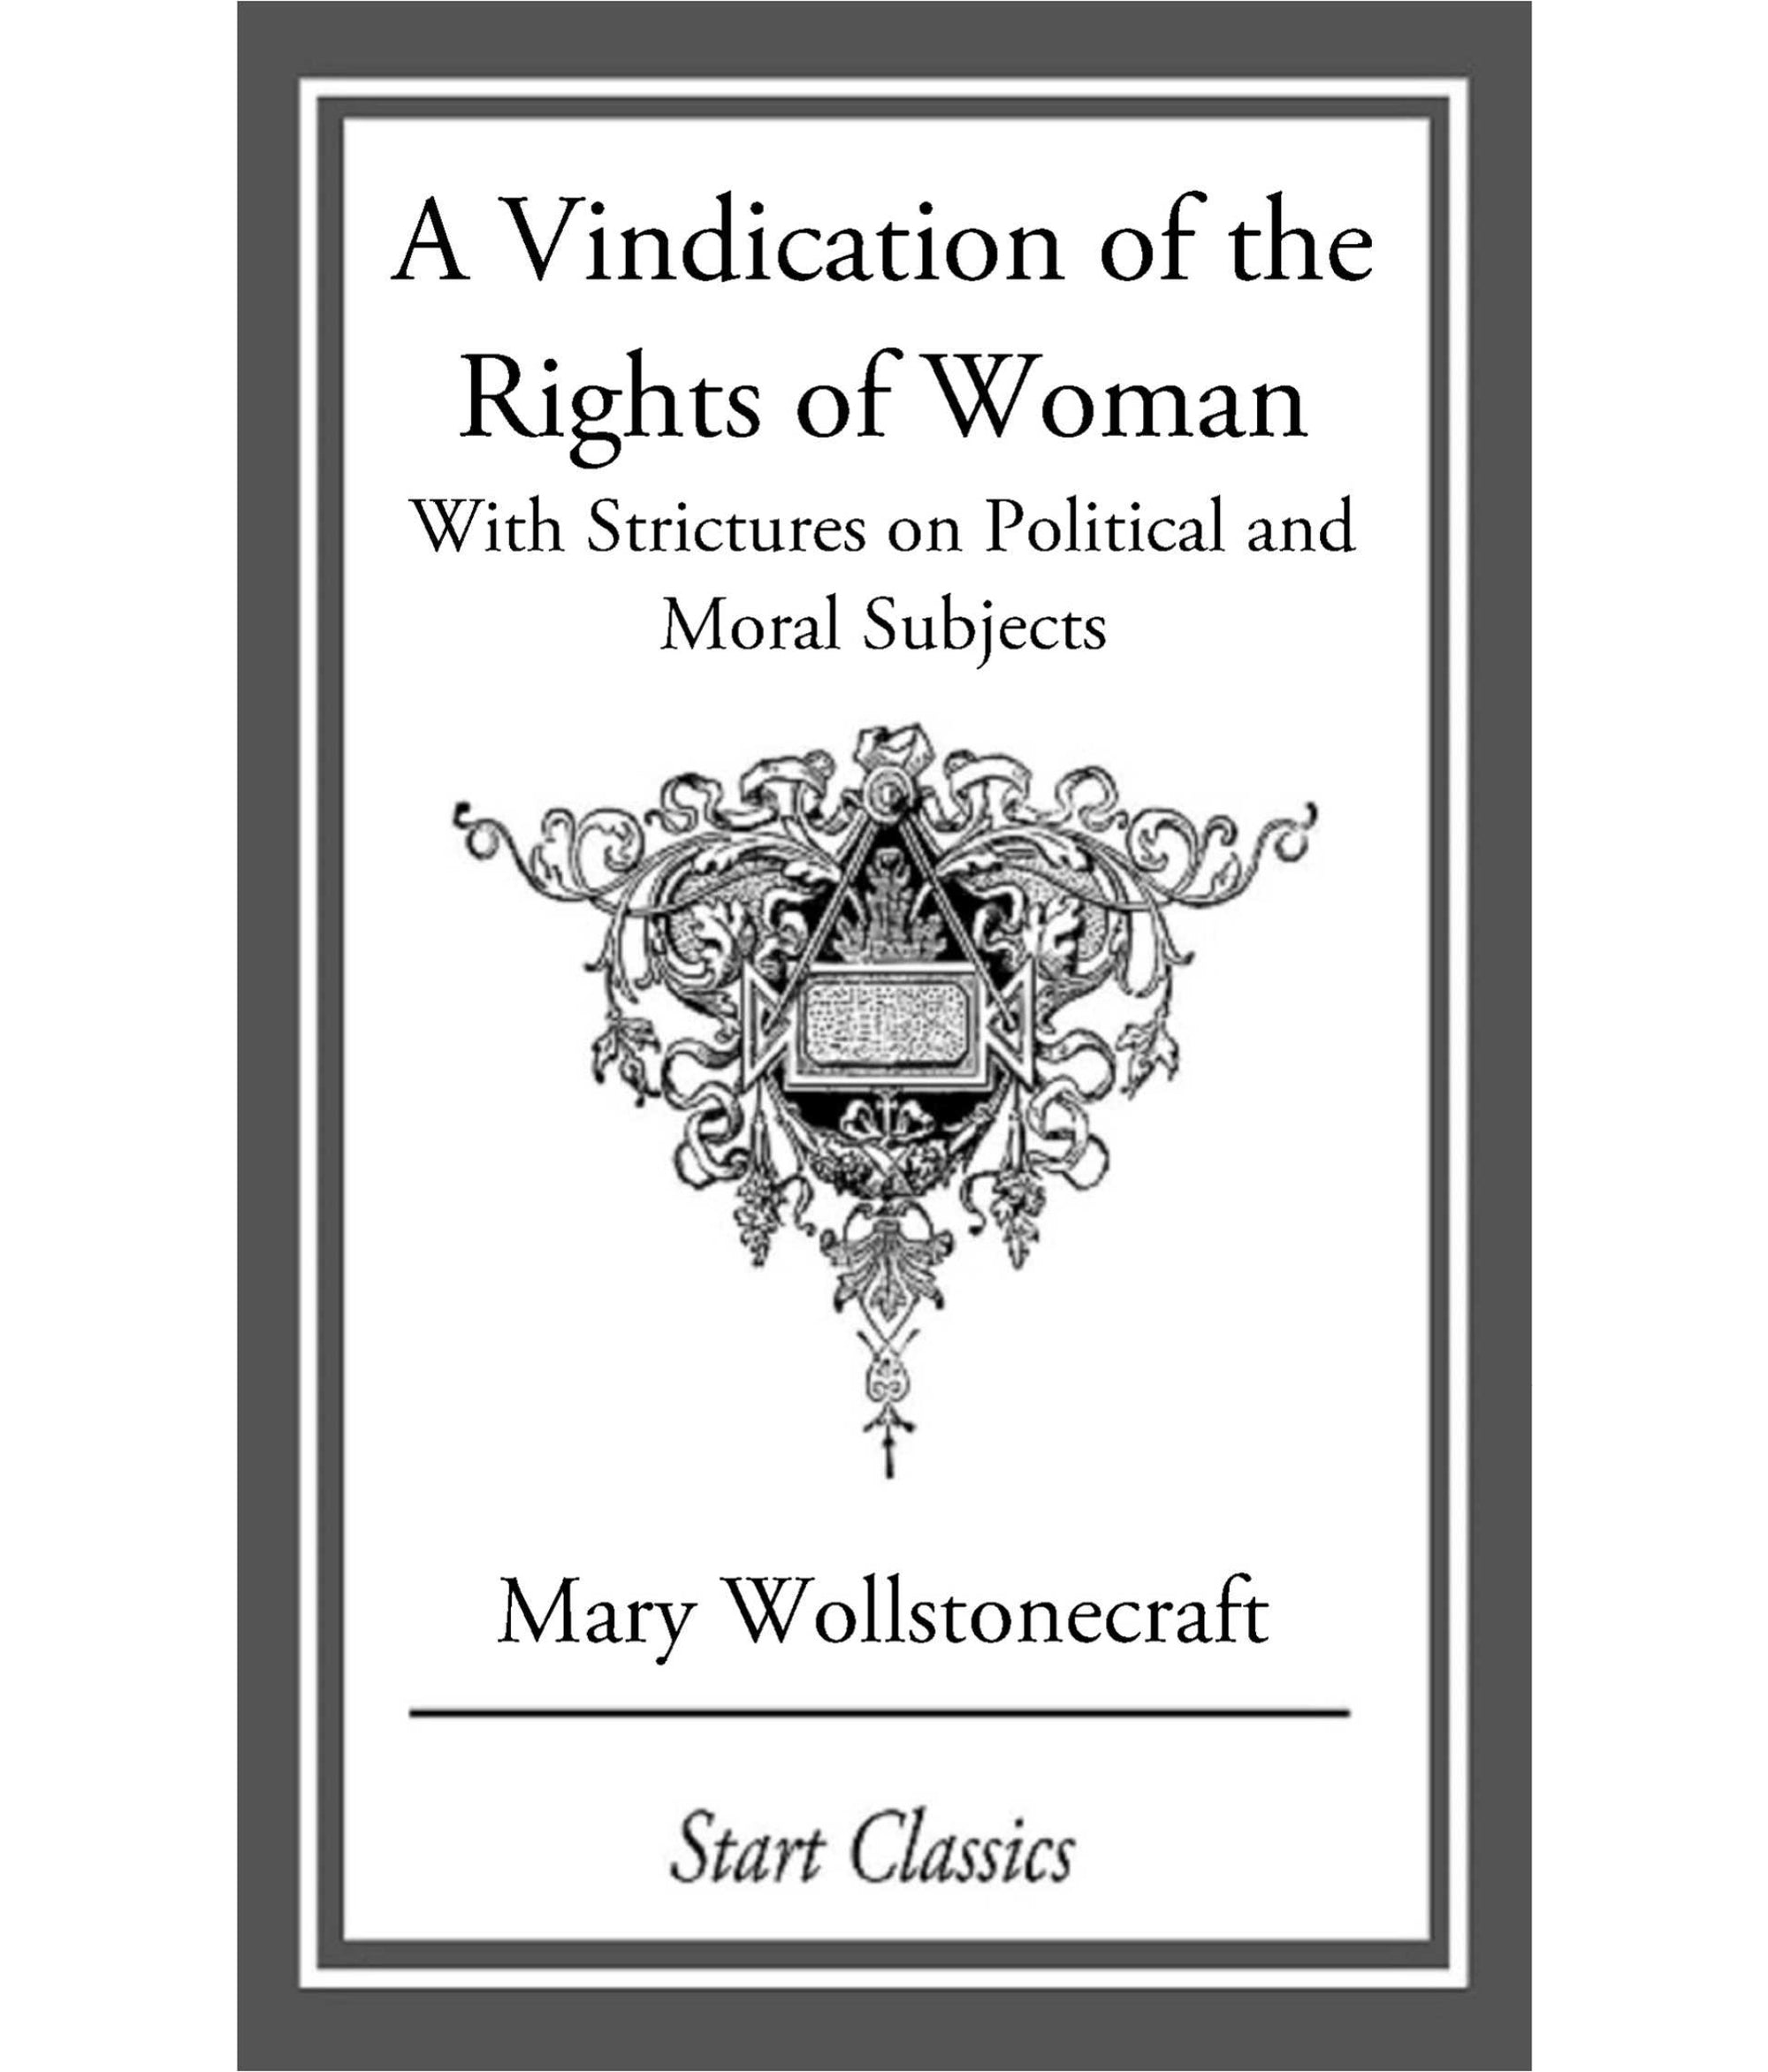 A Vindication of the Rights of Woman  by Mary Wollstonecraft